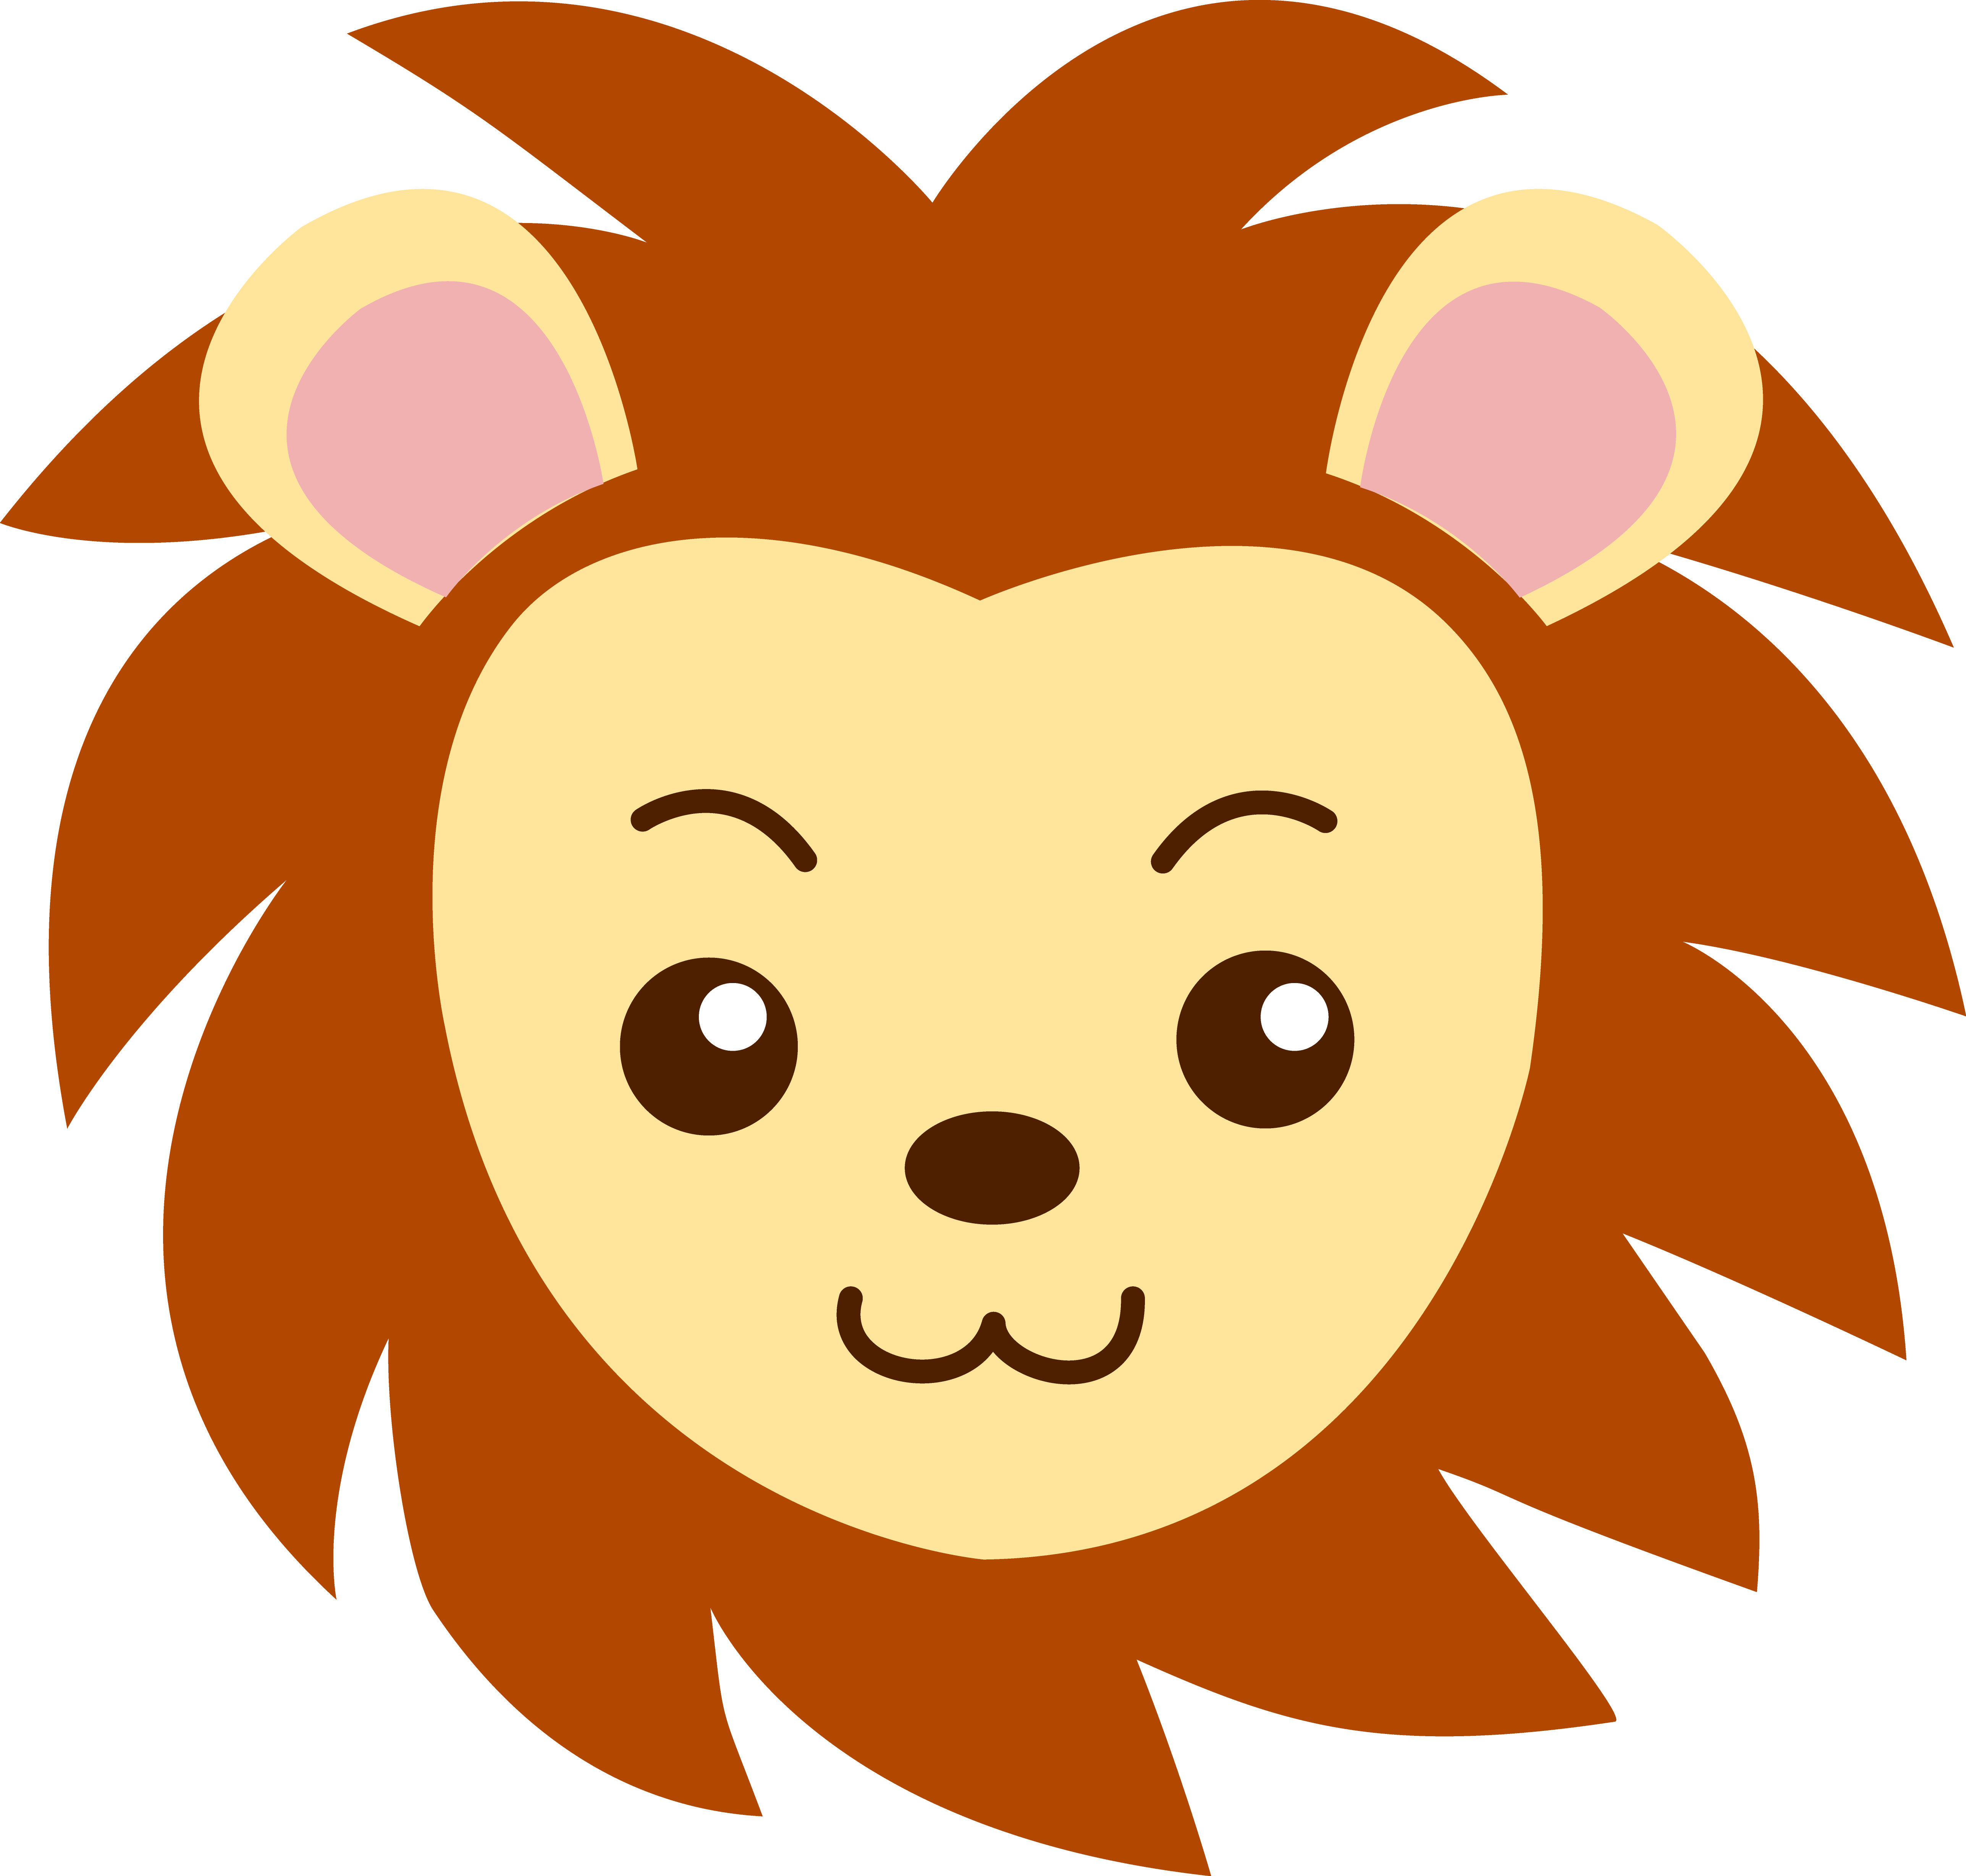 Sunny clipart face. Lion for kids at